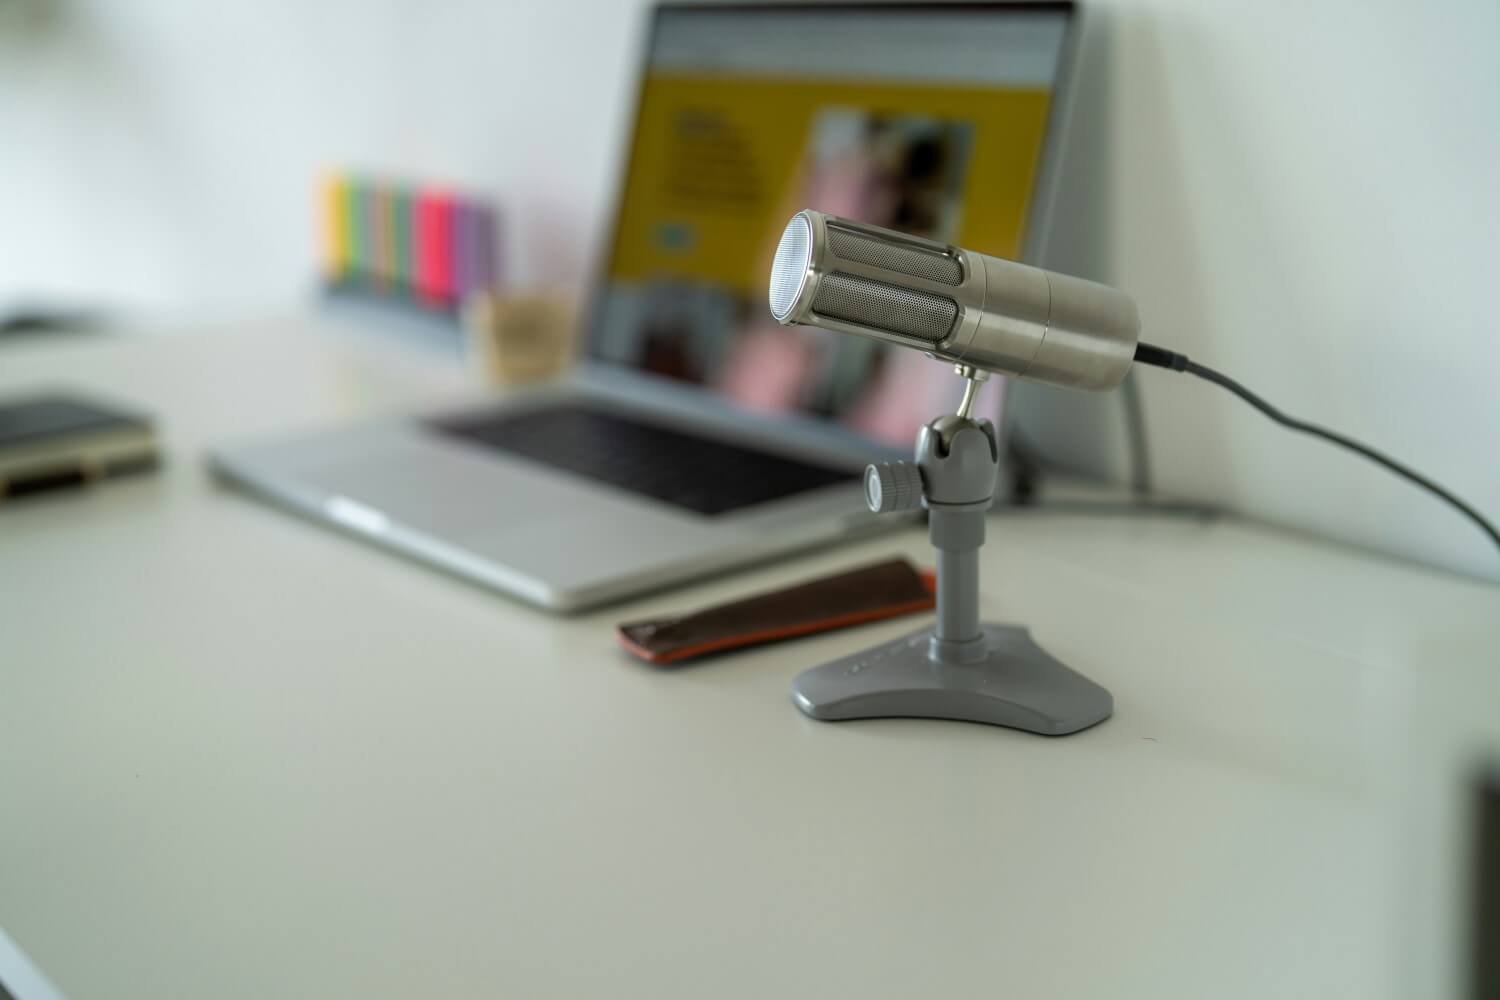 a USB mic on a table next to a laptop